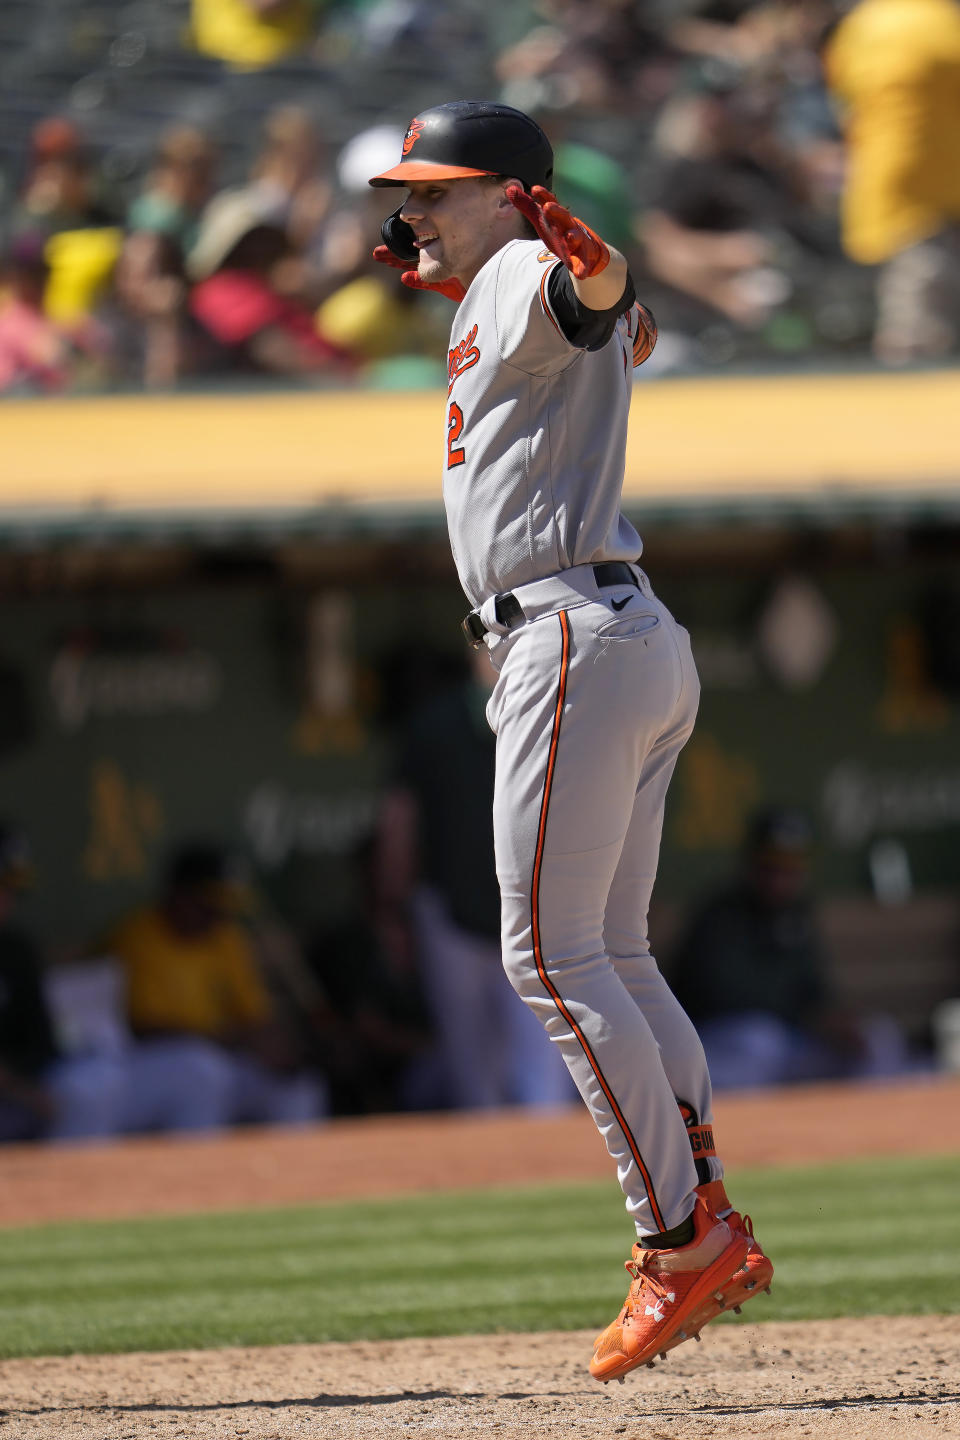 Baltimore Orioles' Gunnar Henderson celebrates after hitting a home run during the seventh inning of a baseball game against the Oakland Athletics in Oakland, Calif., Sunday, Aug. 20, 2023. (AP Photo/Jeff Chiu)